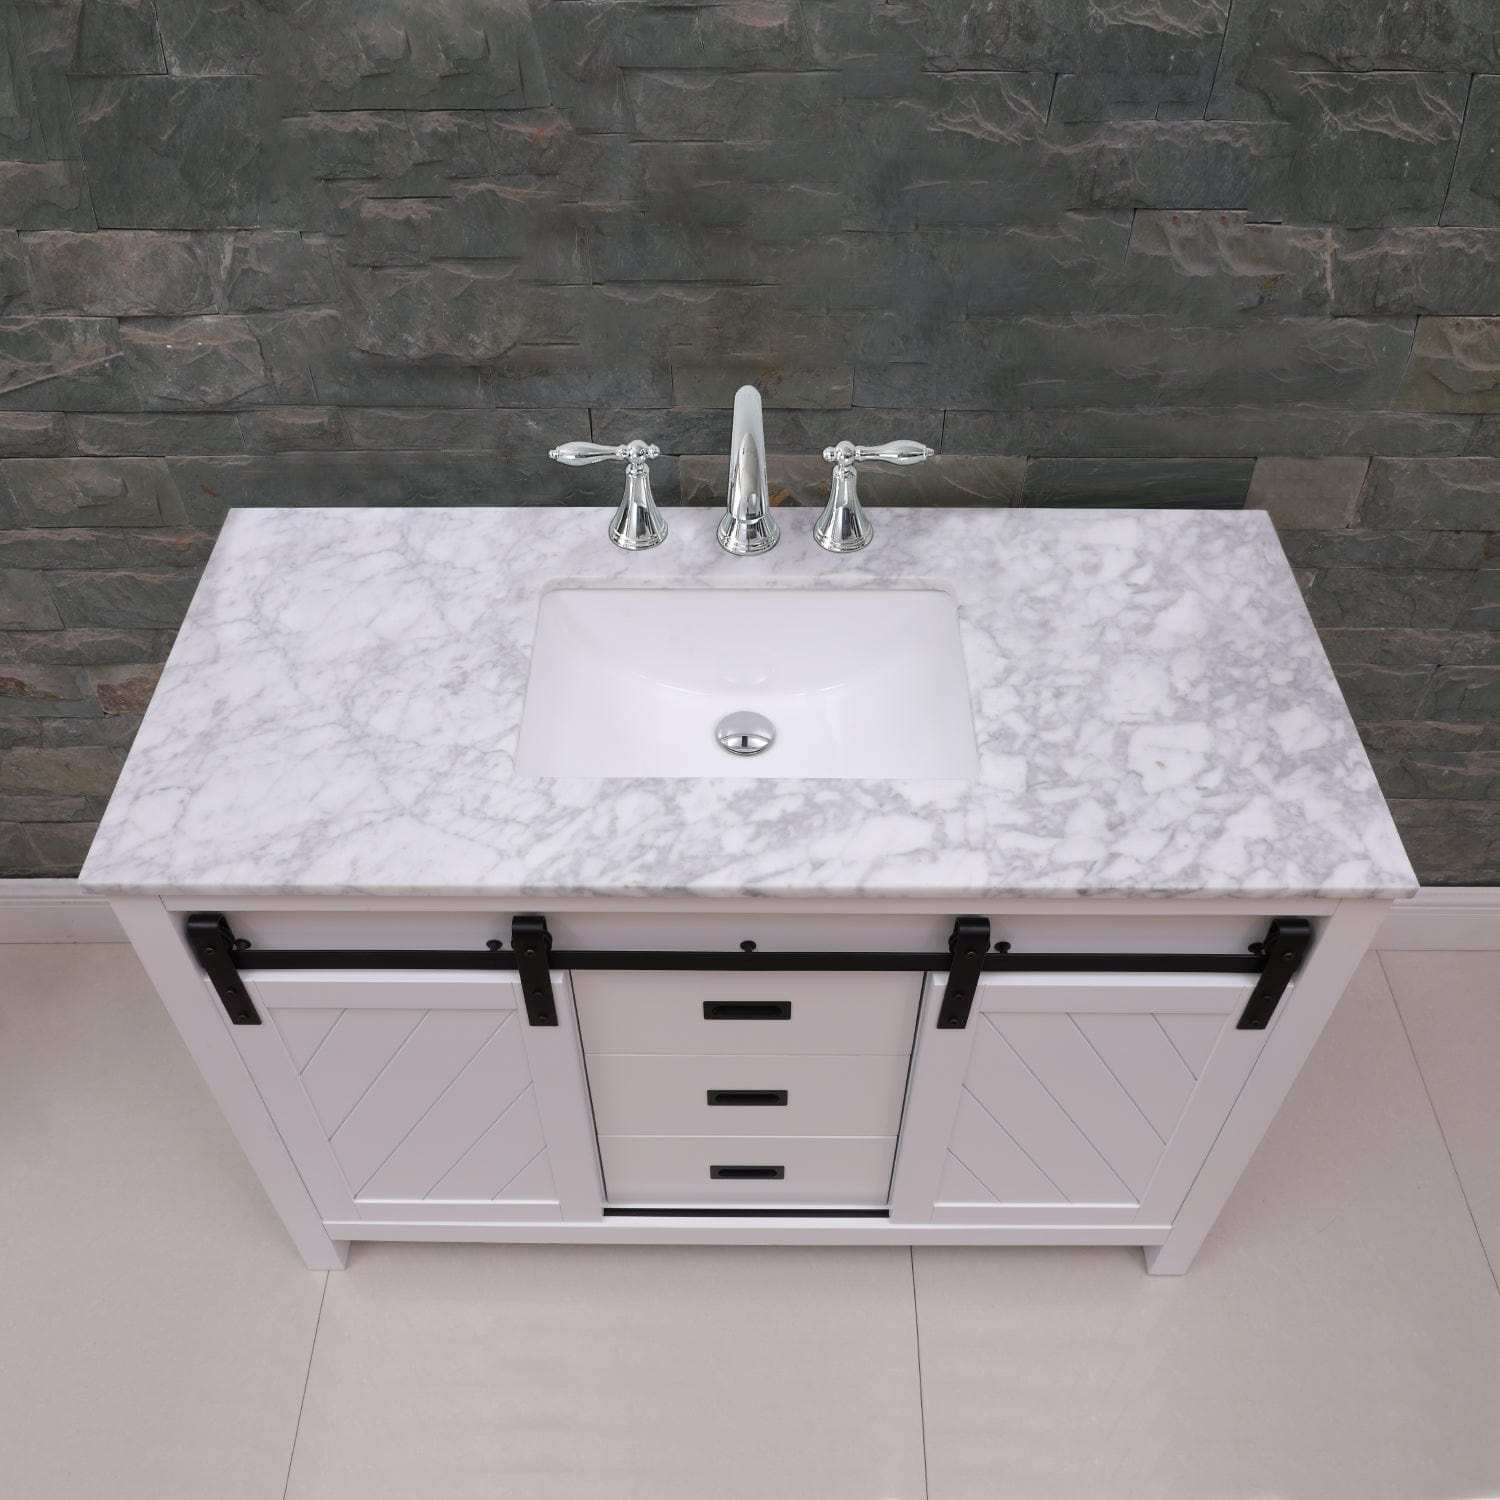 Altair Kinsley 48" Single Bathroom Vanity Set in White and Carrara White Marble Countertop without Mirror 536048-WH-CA-NM - Molaix631112970501Vanity536048-WH-CA-NM